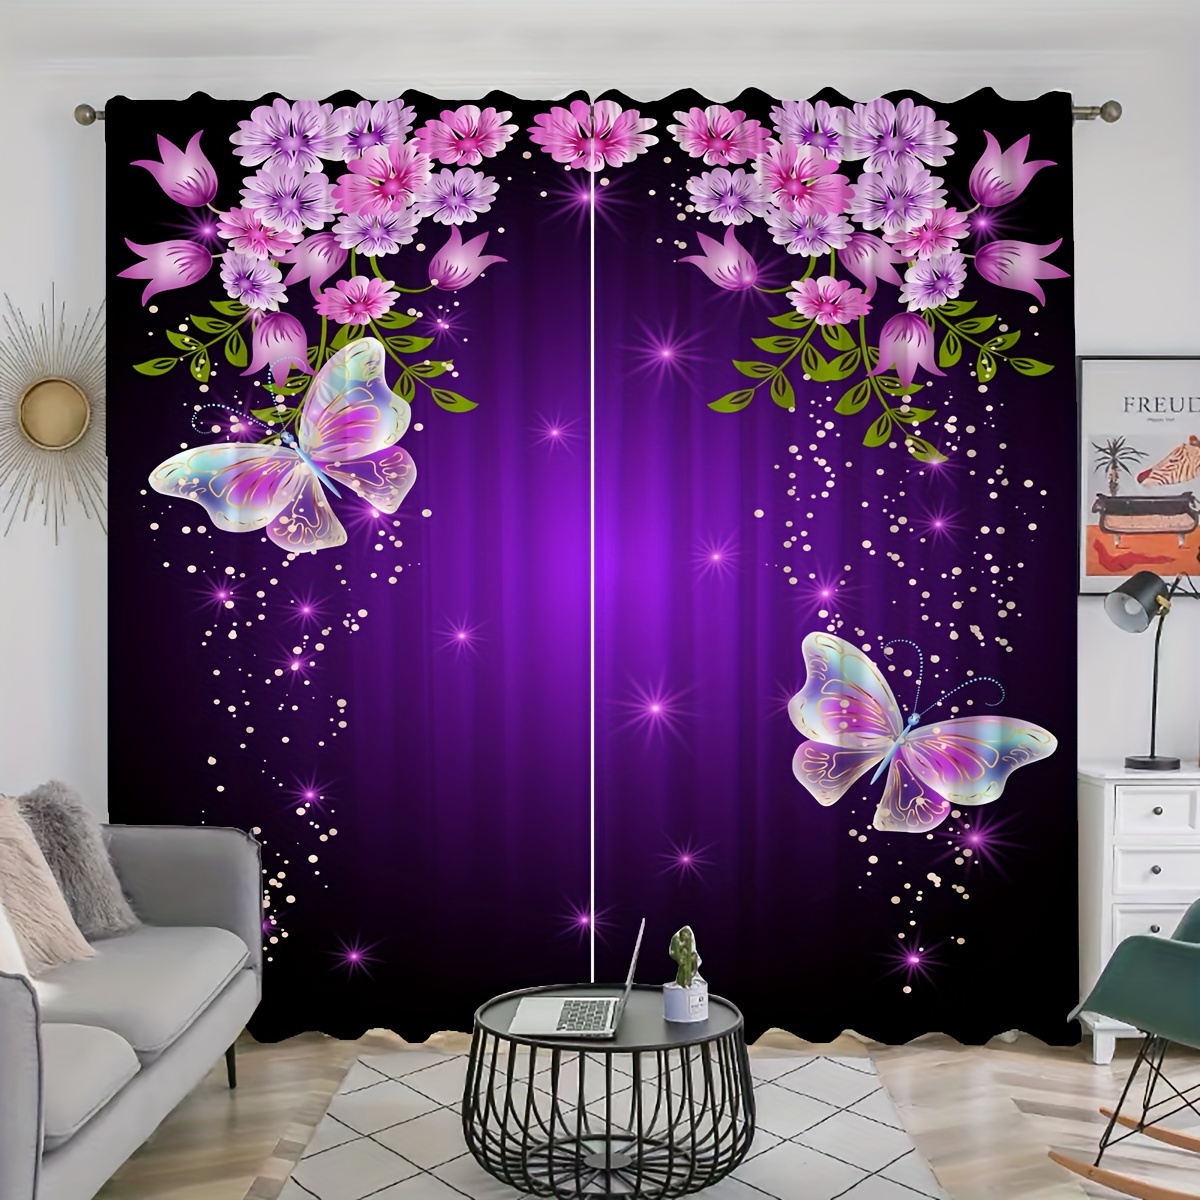 

2pcs, Flower And Transparent Colorful Butterfly Printed Curtains, Rod Pocket Curtain, Suitable For Restaurants, Public Places, Living Rooms, Bedrooms, Offices, Study Rooms, Home Decoration